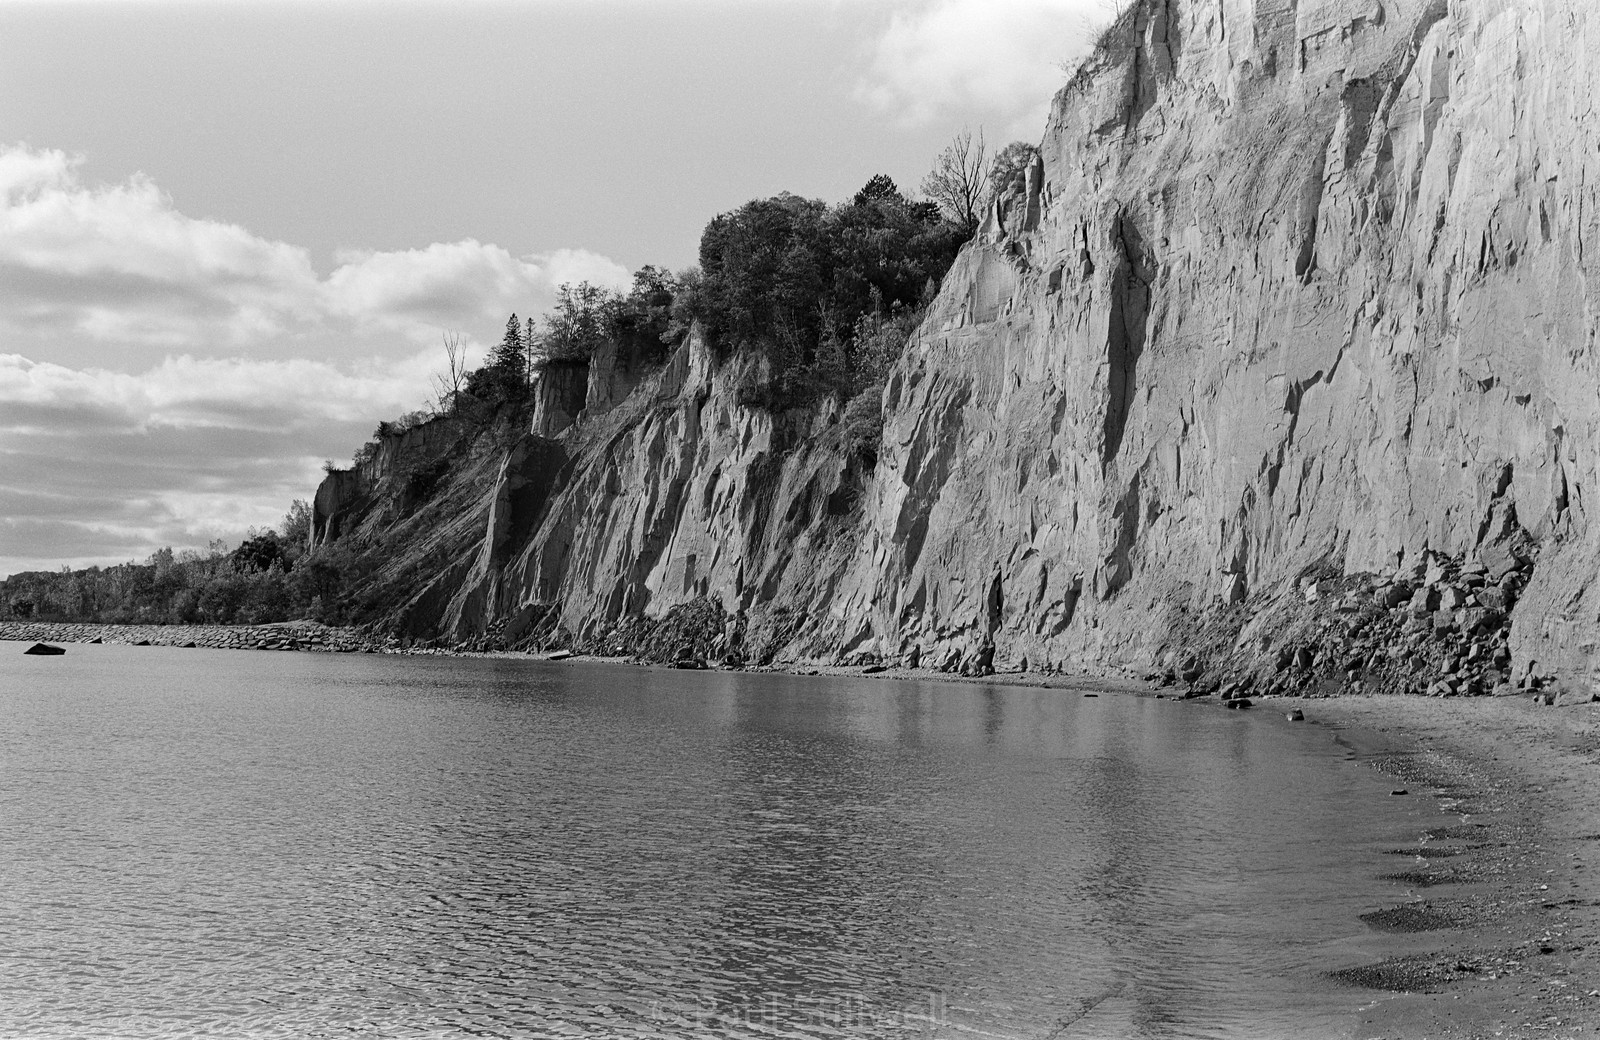 The Cathedral Bluffs